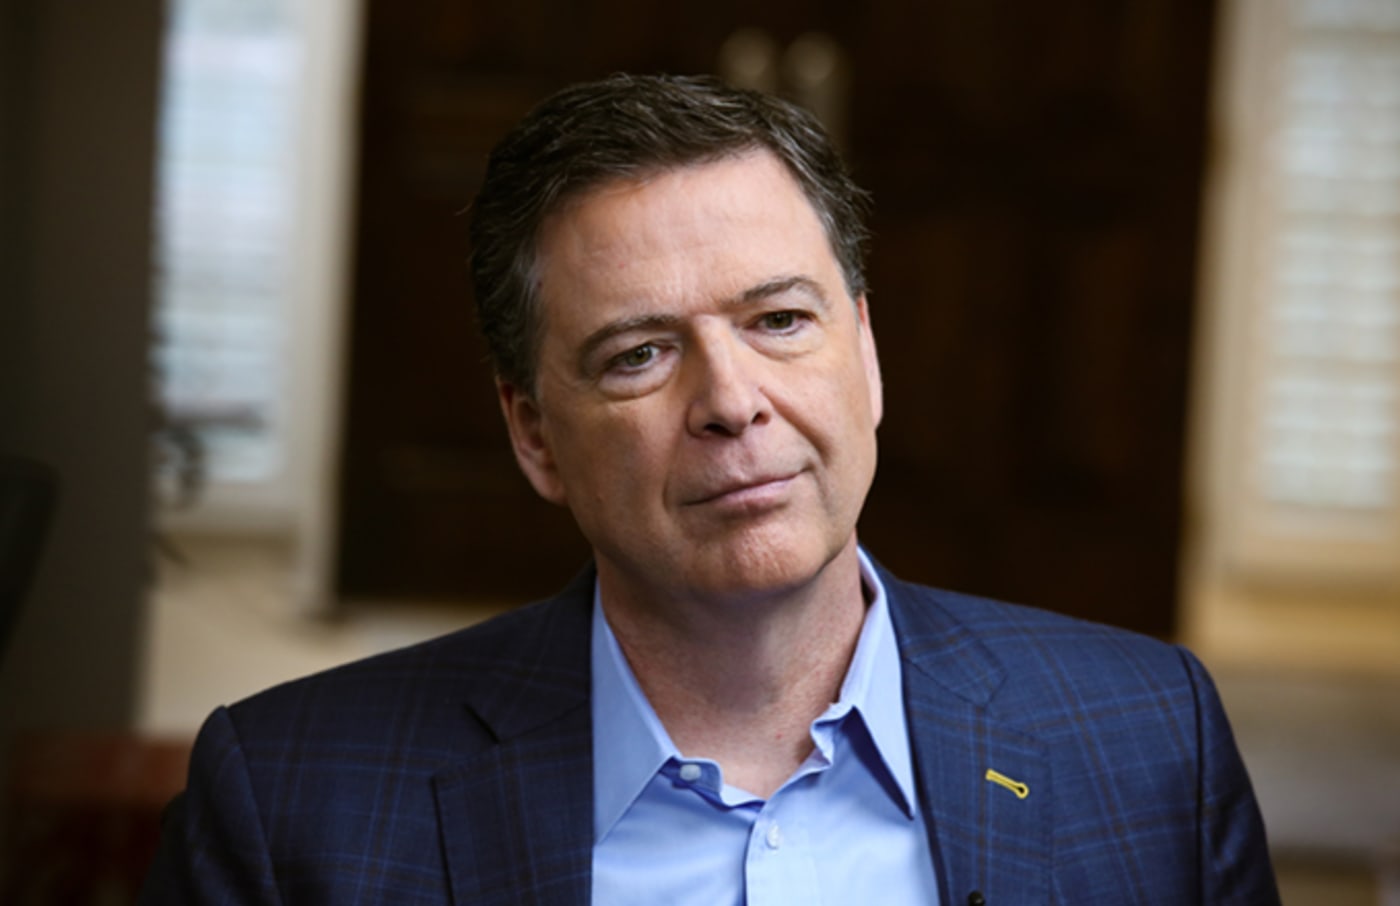 james comey getty abc news interview